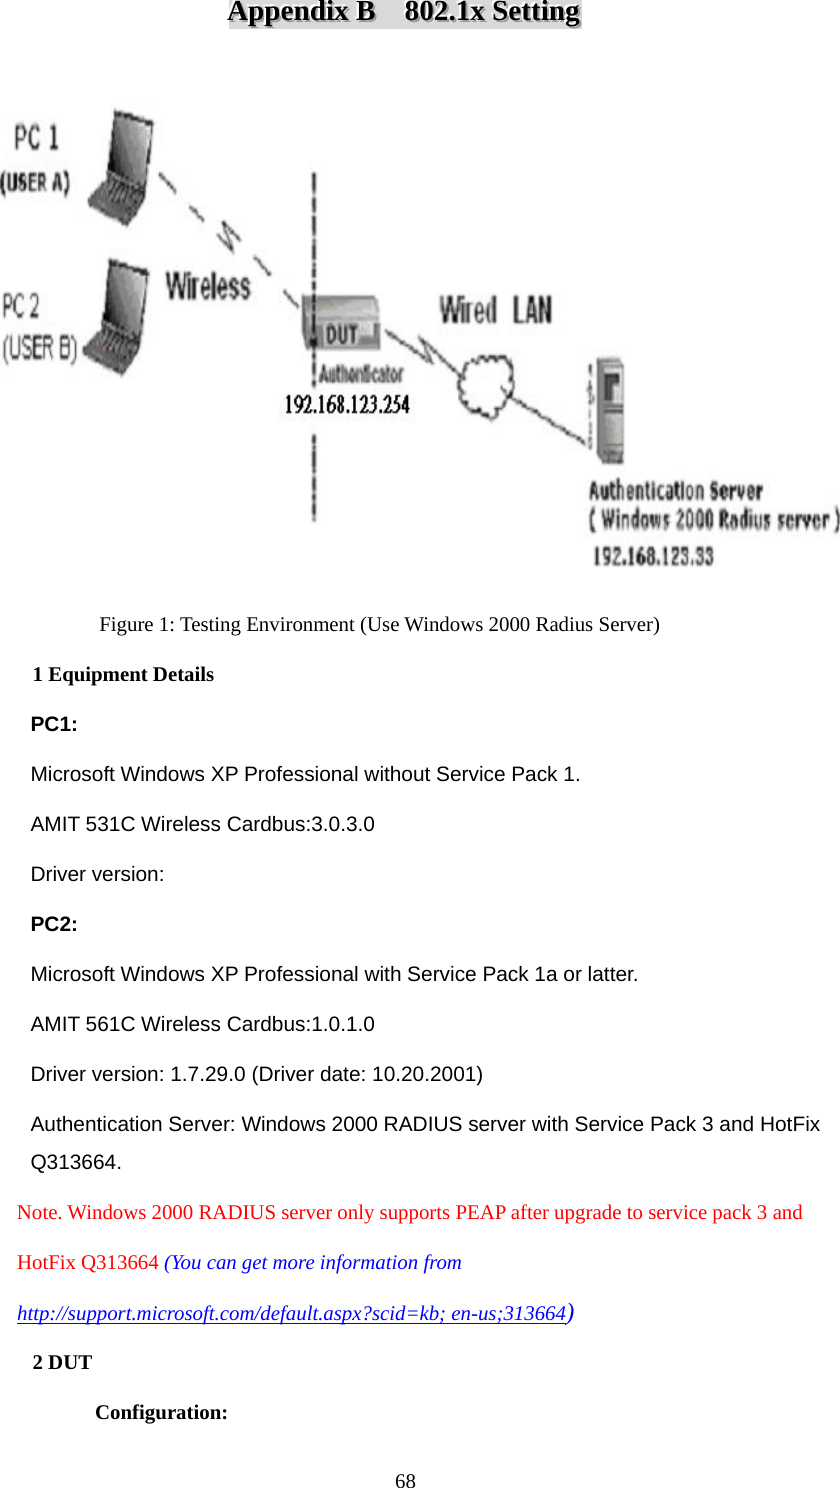 AAAppppppeeennndddiiixxx   BBB      888000222...111xxx   SSSeeettttttiiinnnggg     Figure 1: Testing Environment (Use Windows 2000 Radius Server) 1 Equipment Details PC1:  Microsoft Windows XP Professional without Service Pack 1. AMIT 531C Wireless Cardbus:3.0.3.0 Driver version:   PC2:  Microsoft Windows XP Professional with Service Pack 1a or latter. AMIT 561C Wireless Cardbus:1.0.1.0 Driver version: 1.7.29.0 (Driver date: 10.20.2001) Authentication Server: Windows 2000 RADIUS server with Service Pack 3 and HotFix Q313664.     Note. Windows 2000 RADIUS server only supports PEAP after upgrade to service pack 3 and         HotFix Q313664 (You can get more information from         http://support.microsoft.com/default.aspx?scid=kb; en-us;313664) 2 DUT   Configuration:  68